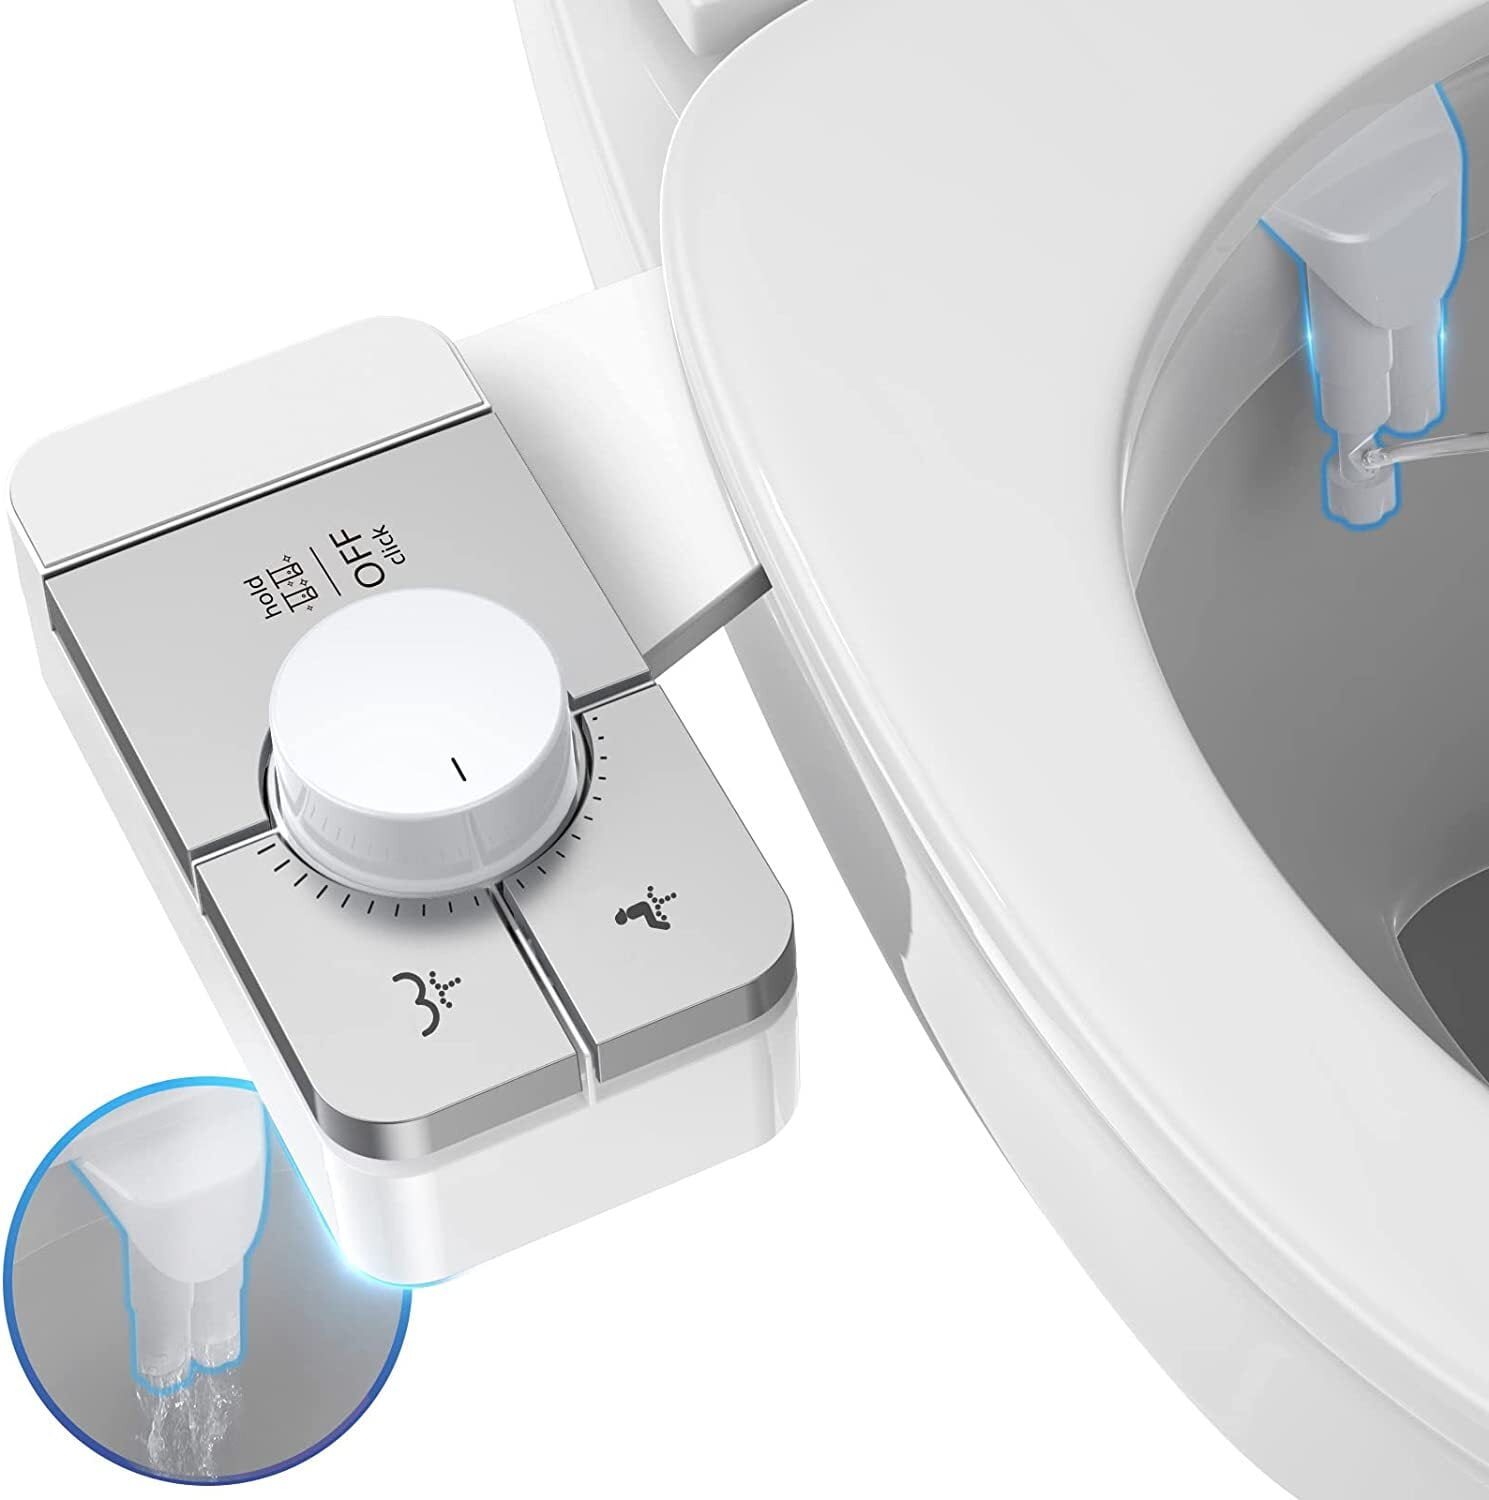 Toilet Paper Alternative: Bidet Attachments and Seats - Get Green Be Well